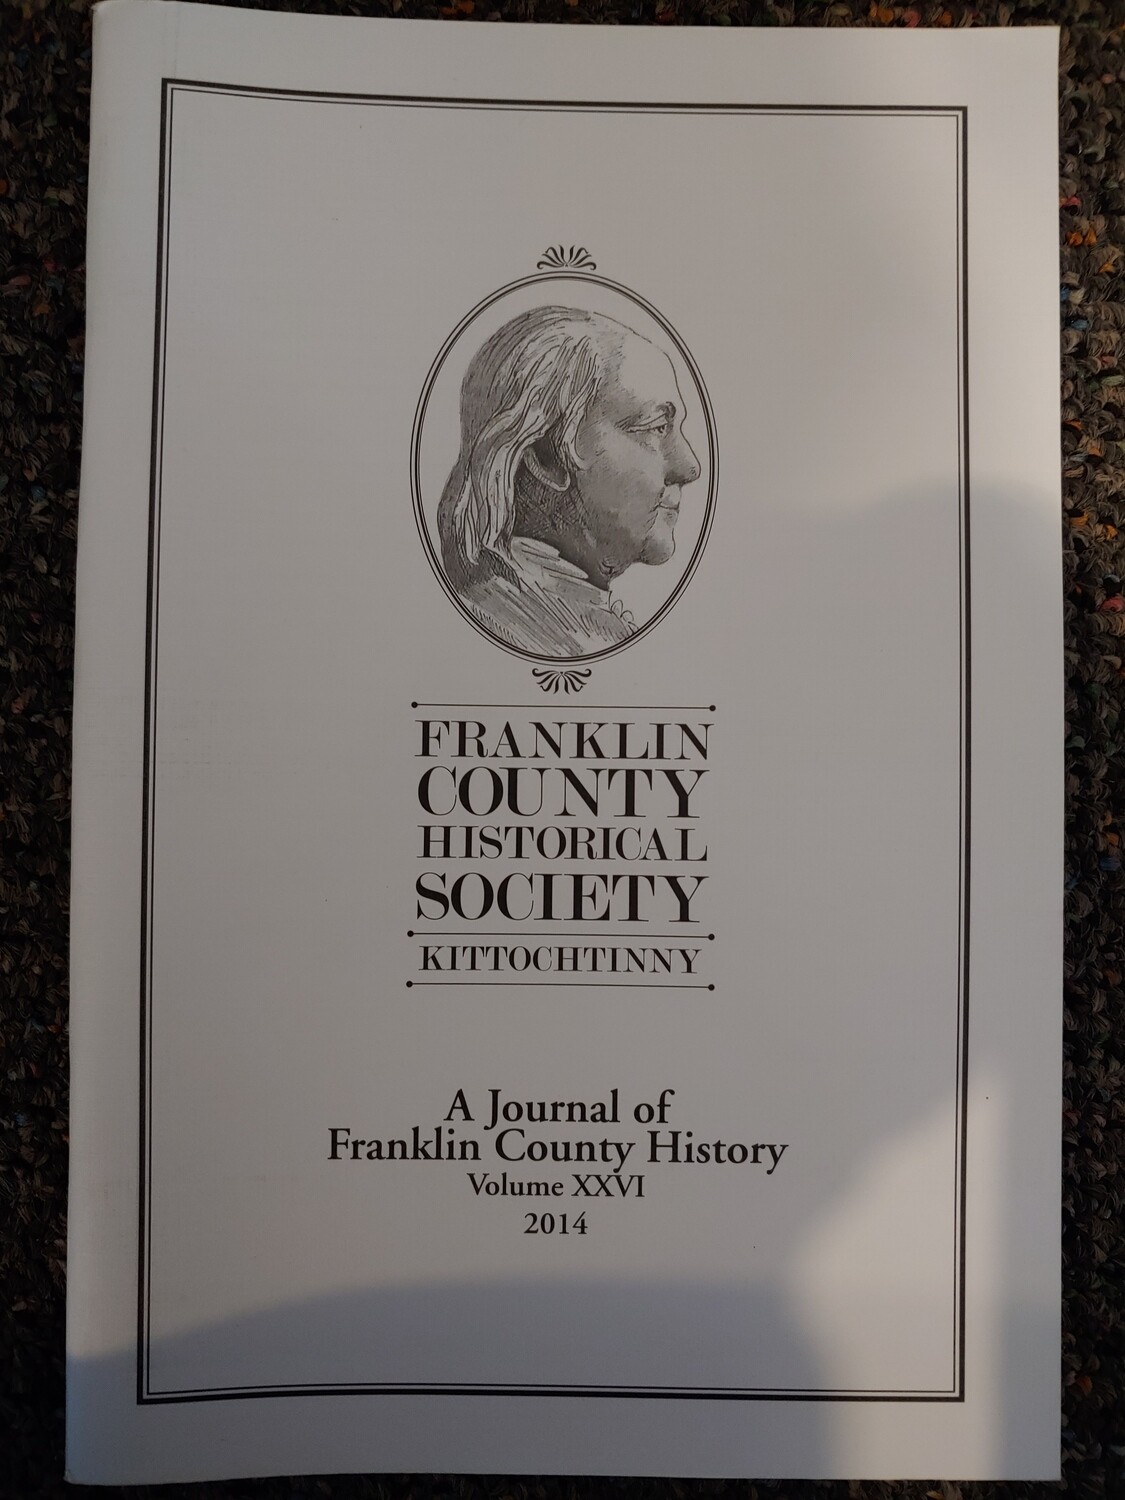 Franklin County Historical Society Journal 2014